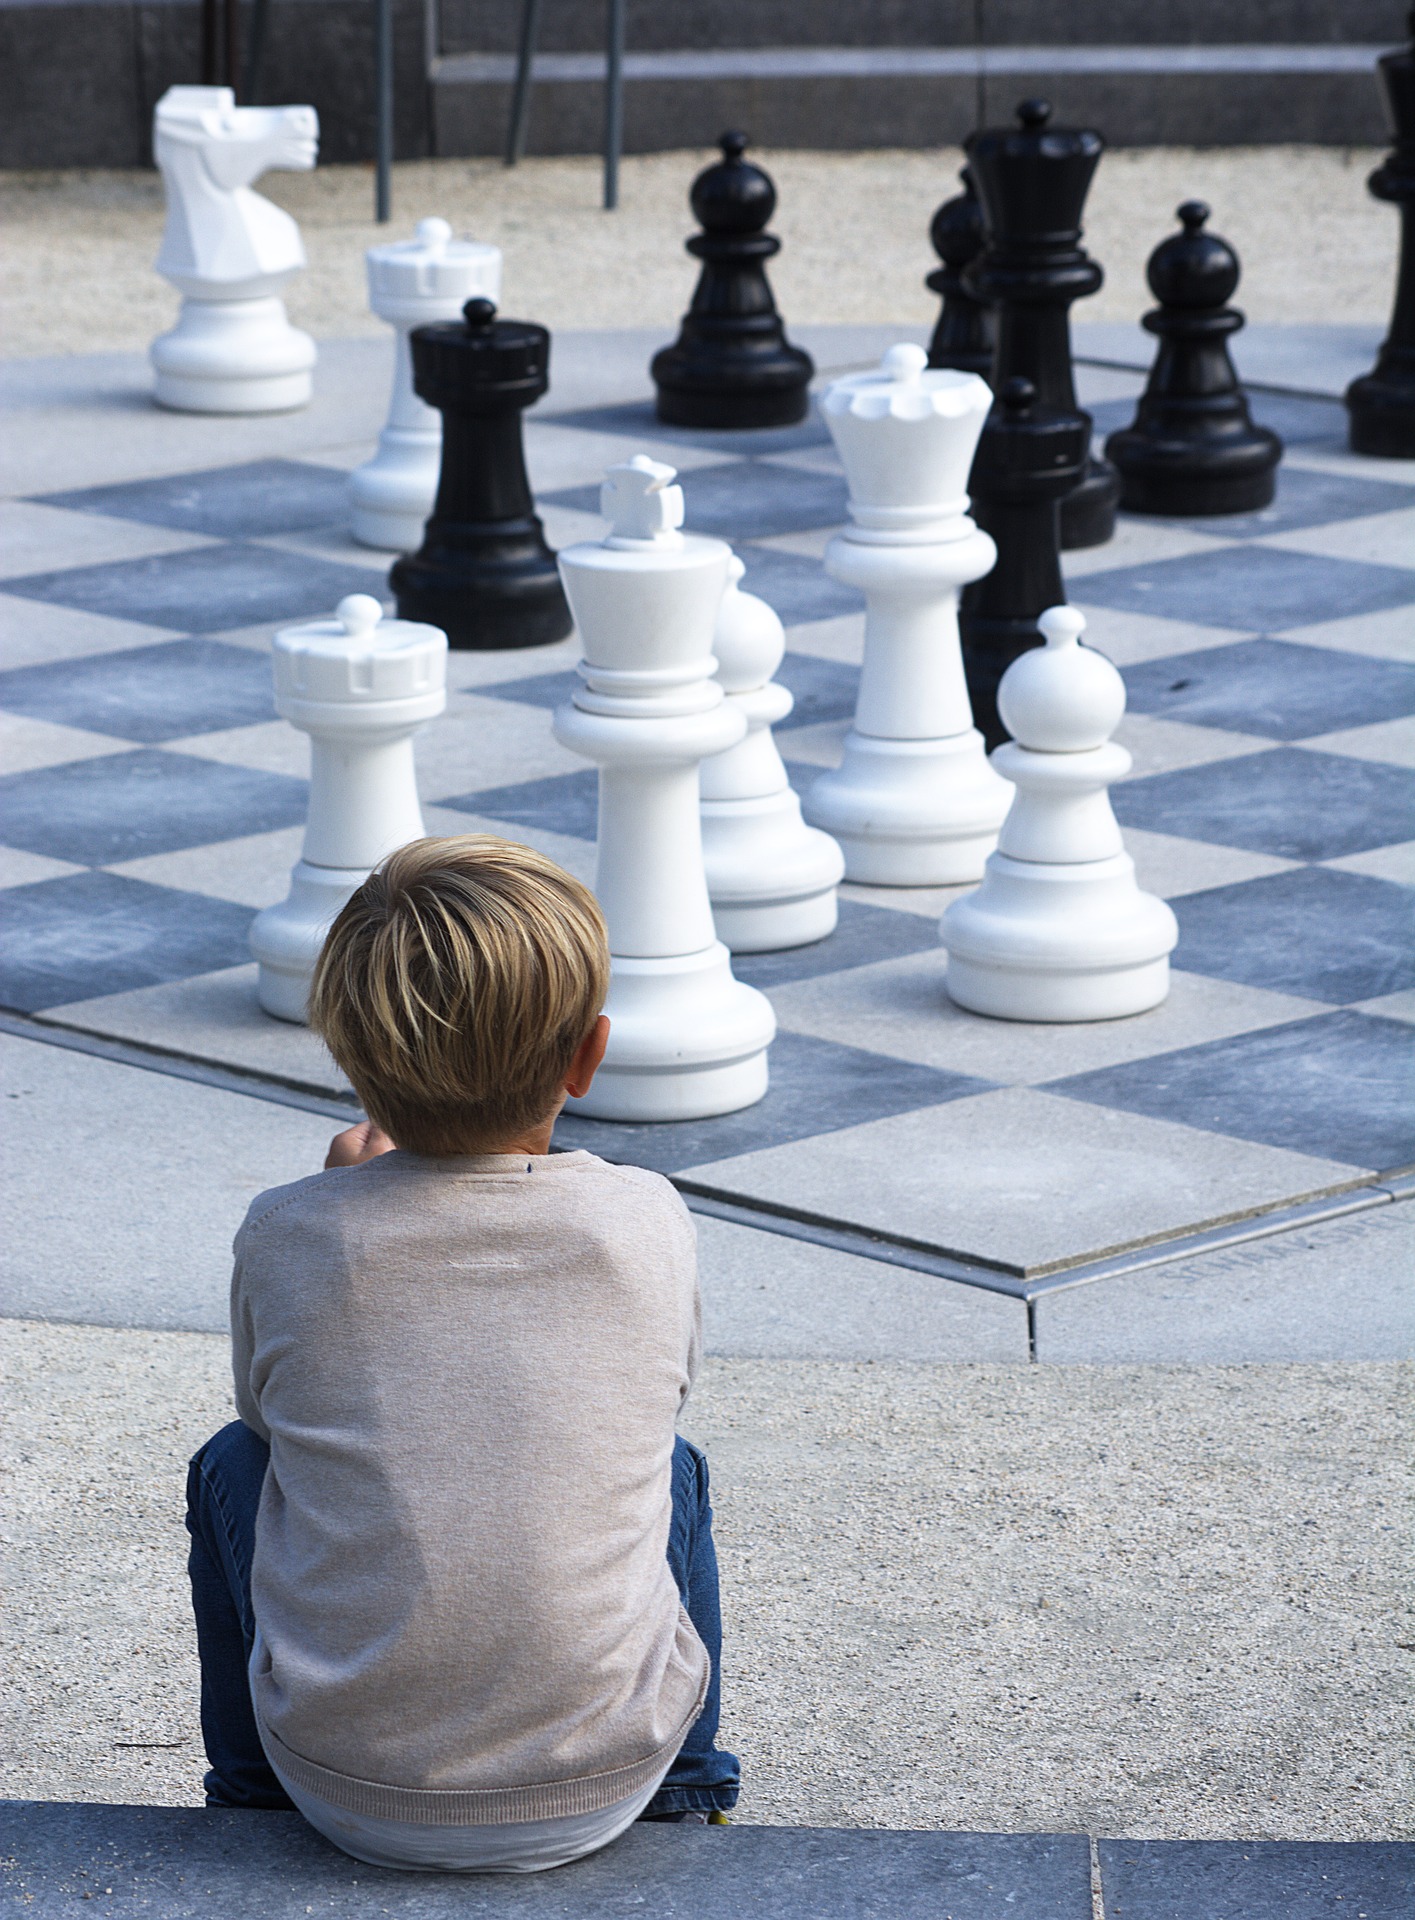 Learn to master the game of chess